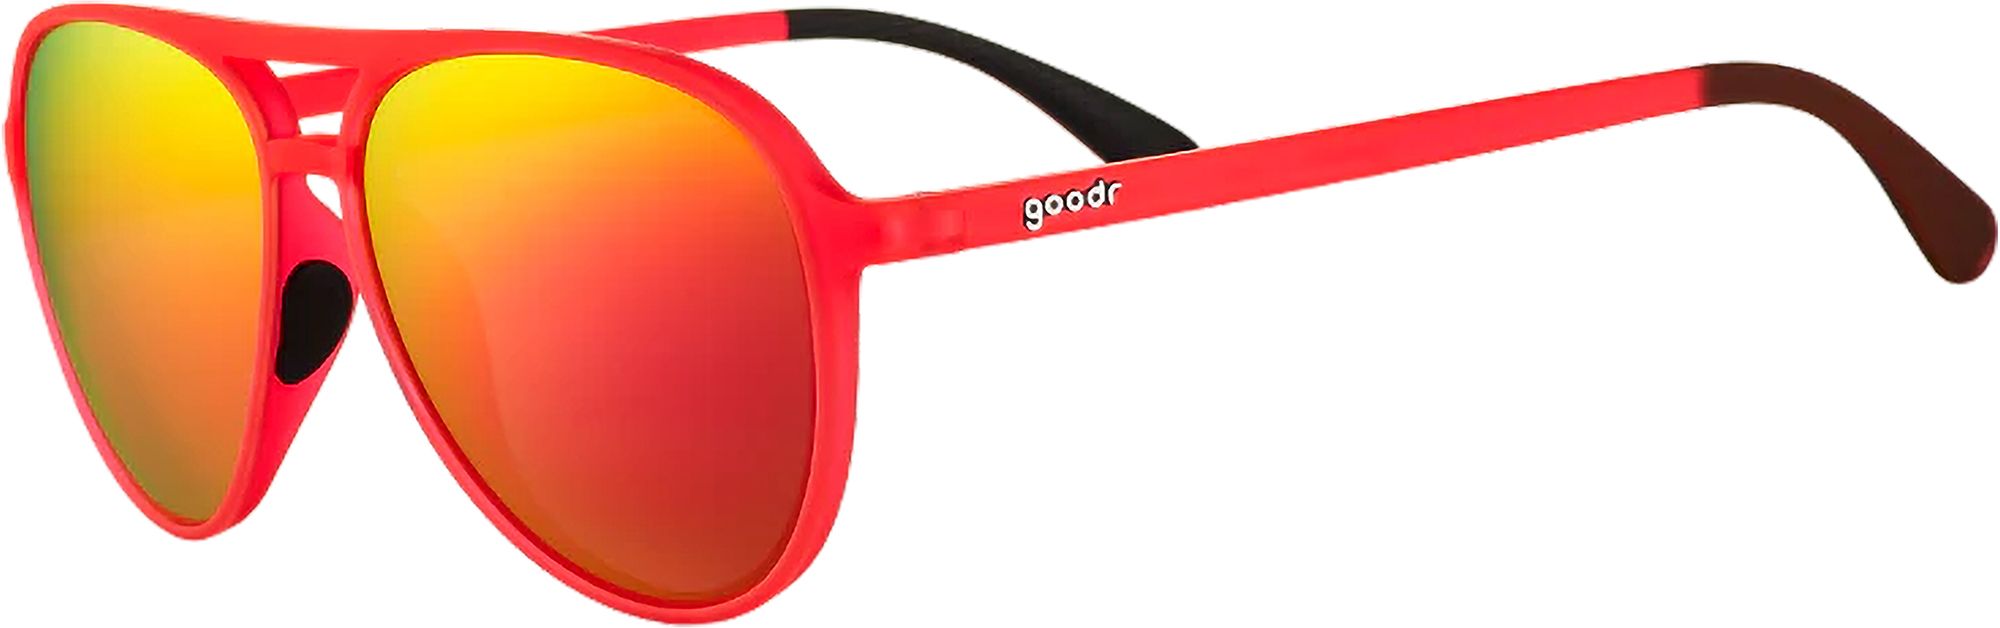 Photos - Sunglasses Goodr Captain Blunt's Red-Eye Polarized Reflective , Men's, Red/